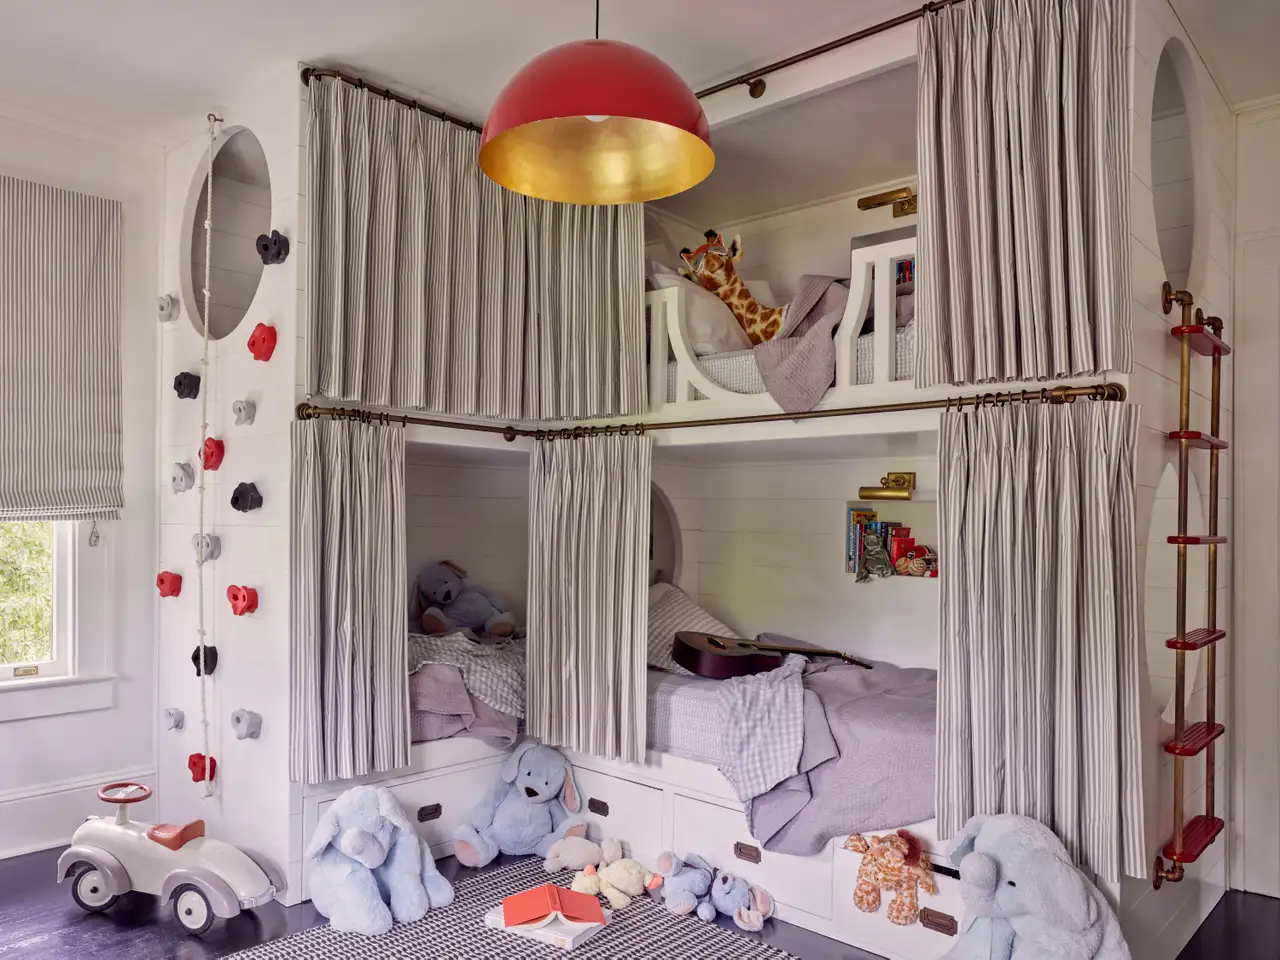 childern's room with striped curtains